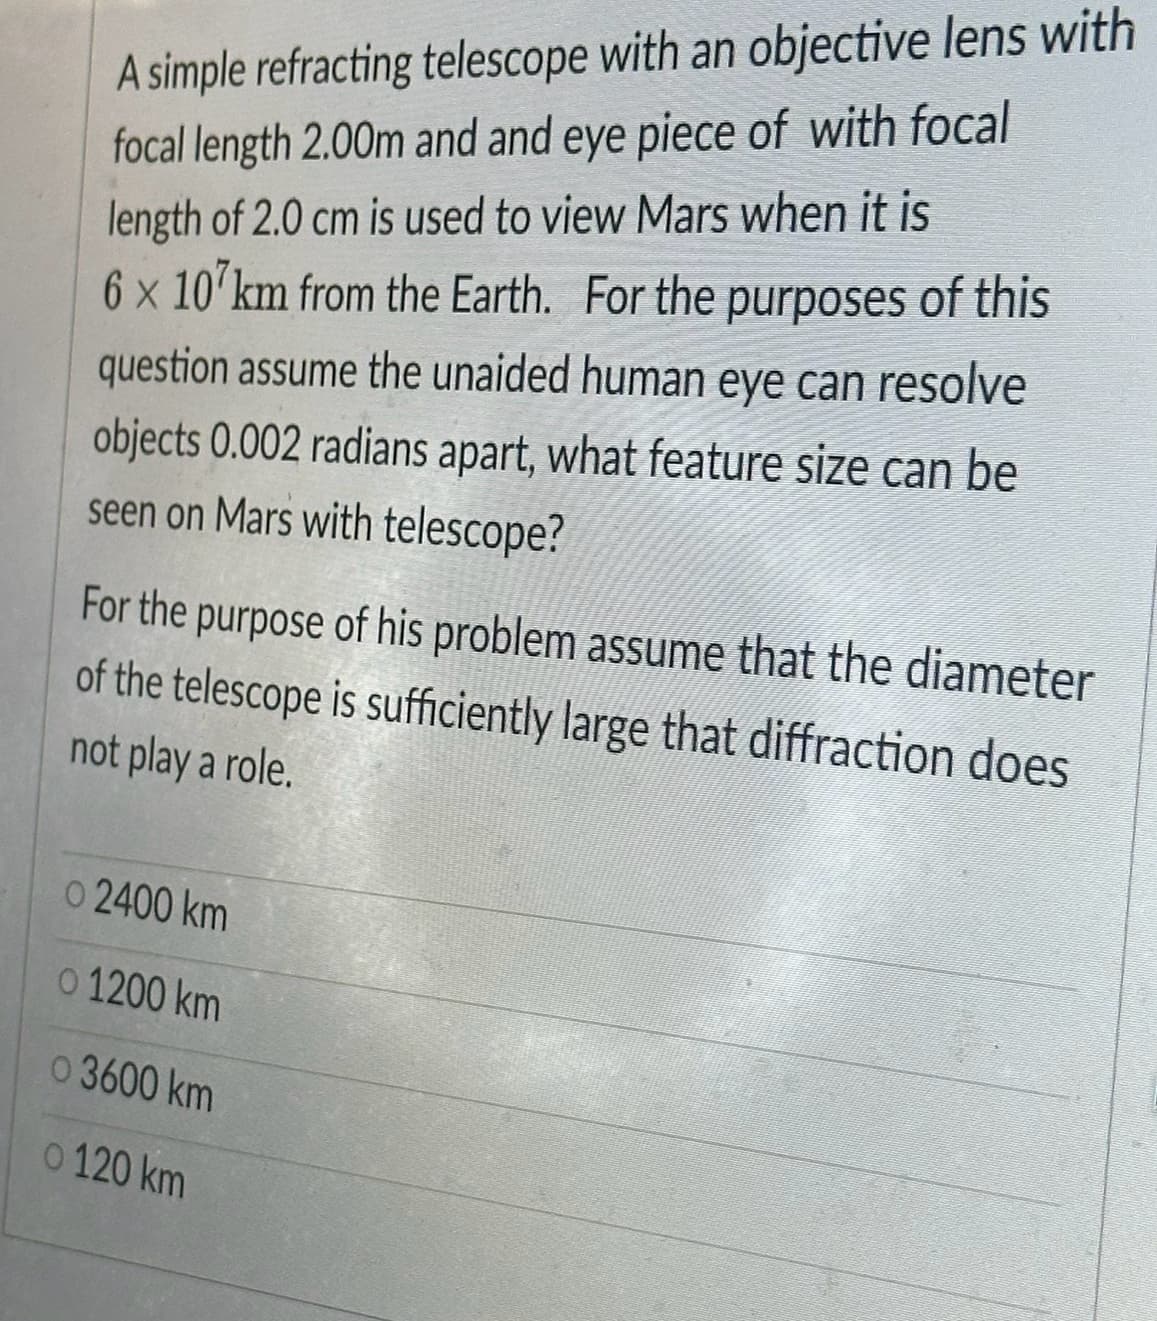 A simple refracting telescope with an objective lens with
focal length 2.00m and and eye piece of with focal
length of 2.0 cm is used to view Mars when it is
6 x 107km from the Earth. For the purposes of this
question assume the unaided human eye can resolve
objects 0.002 radians apart, what feature size can be
seen on Mars with telescope?
For the purpose of his problem assume that the diameter
of the telescope is sufficiently large that diffraction does
not play a role.
o 2400 km
o 1200 km
o 3600 km
o 120 km